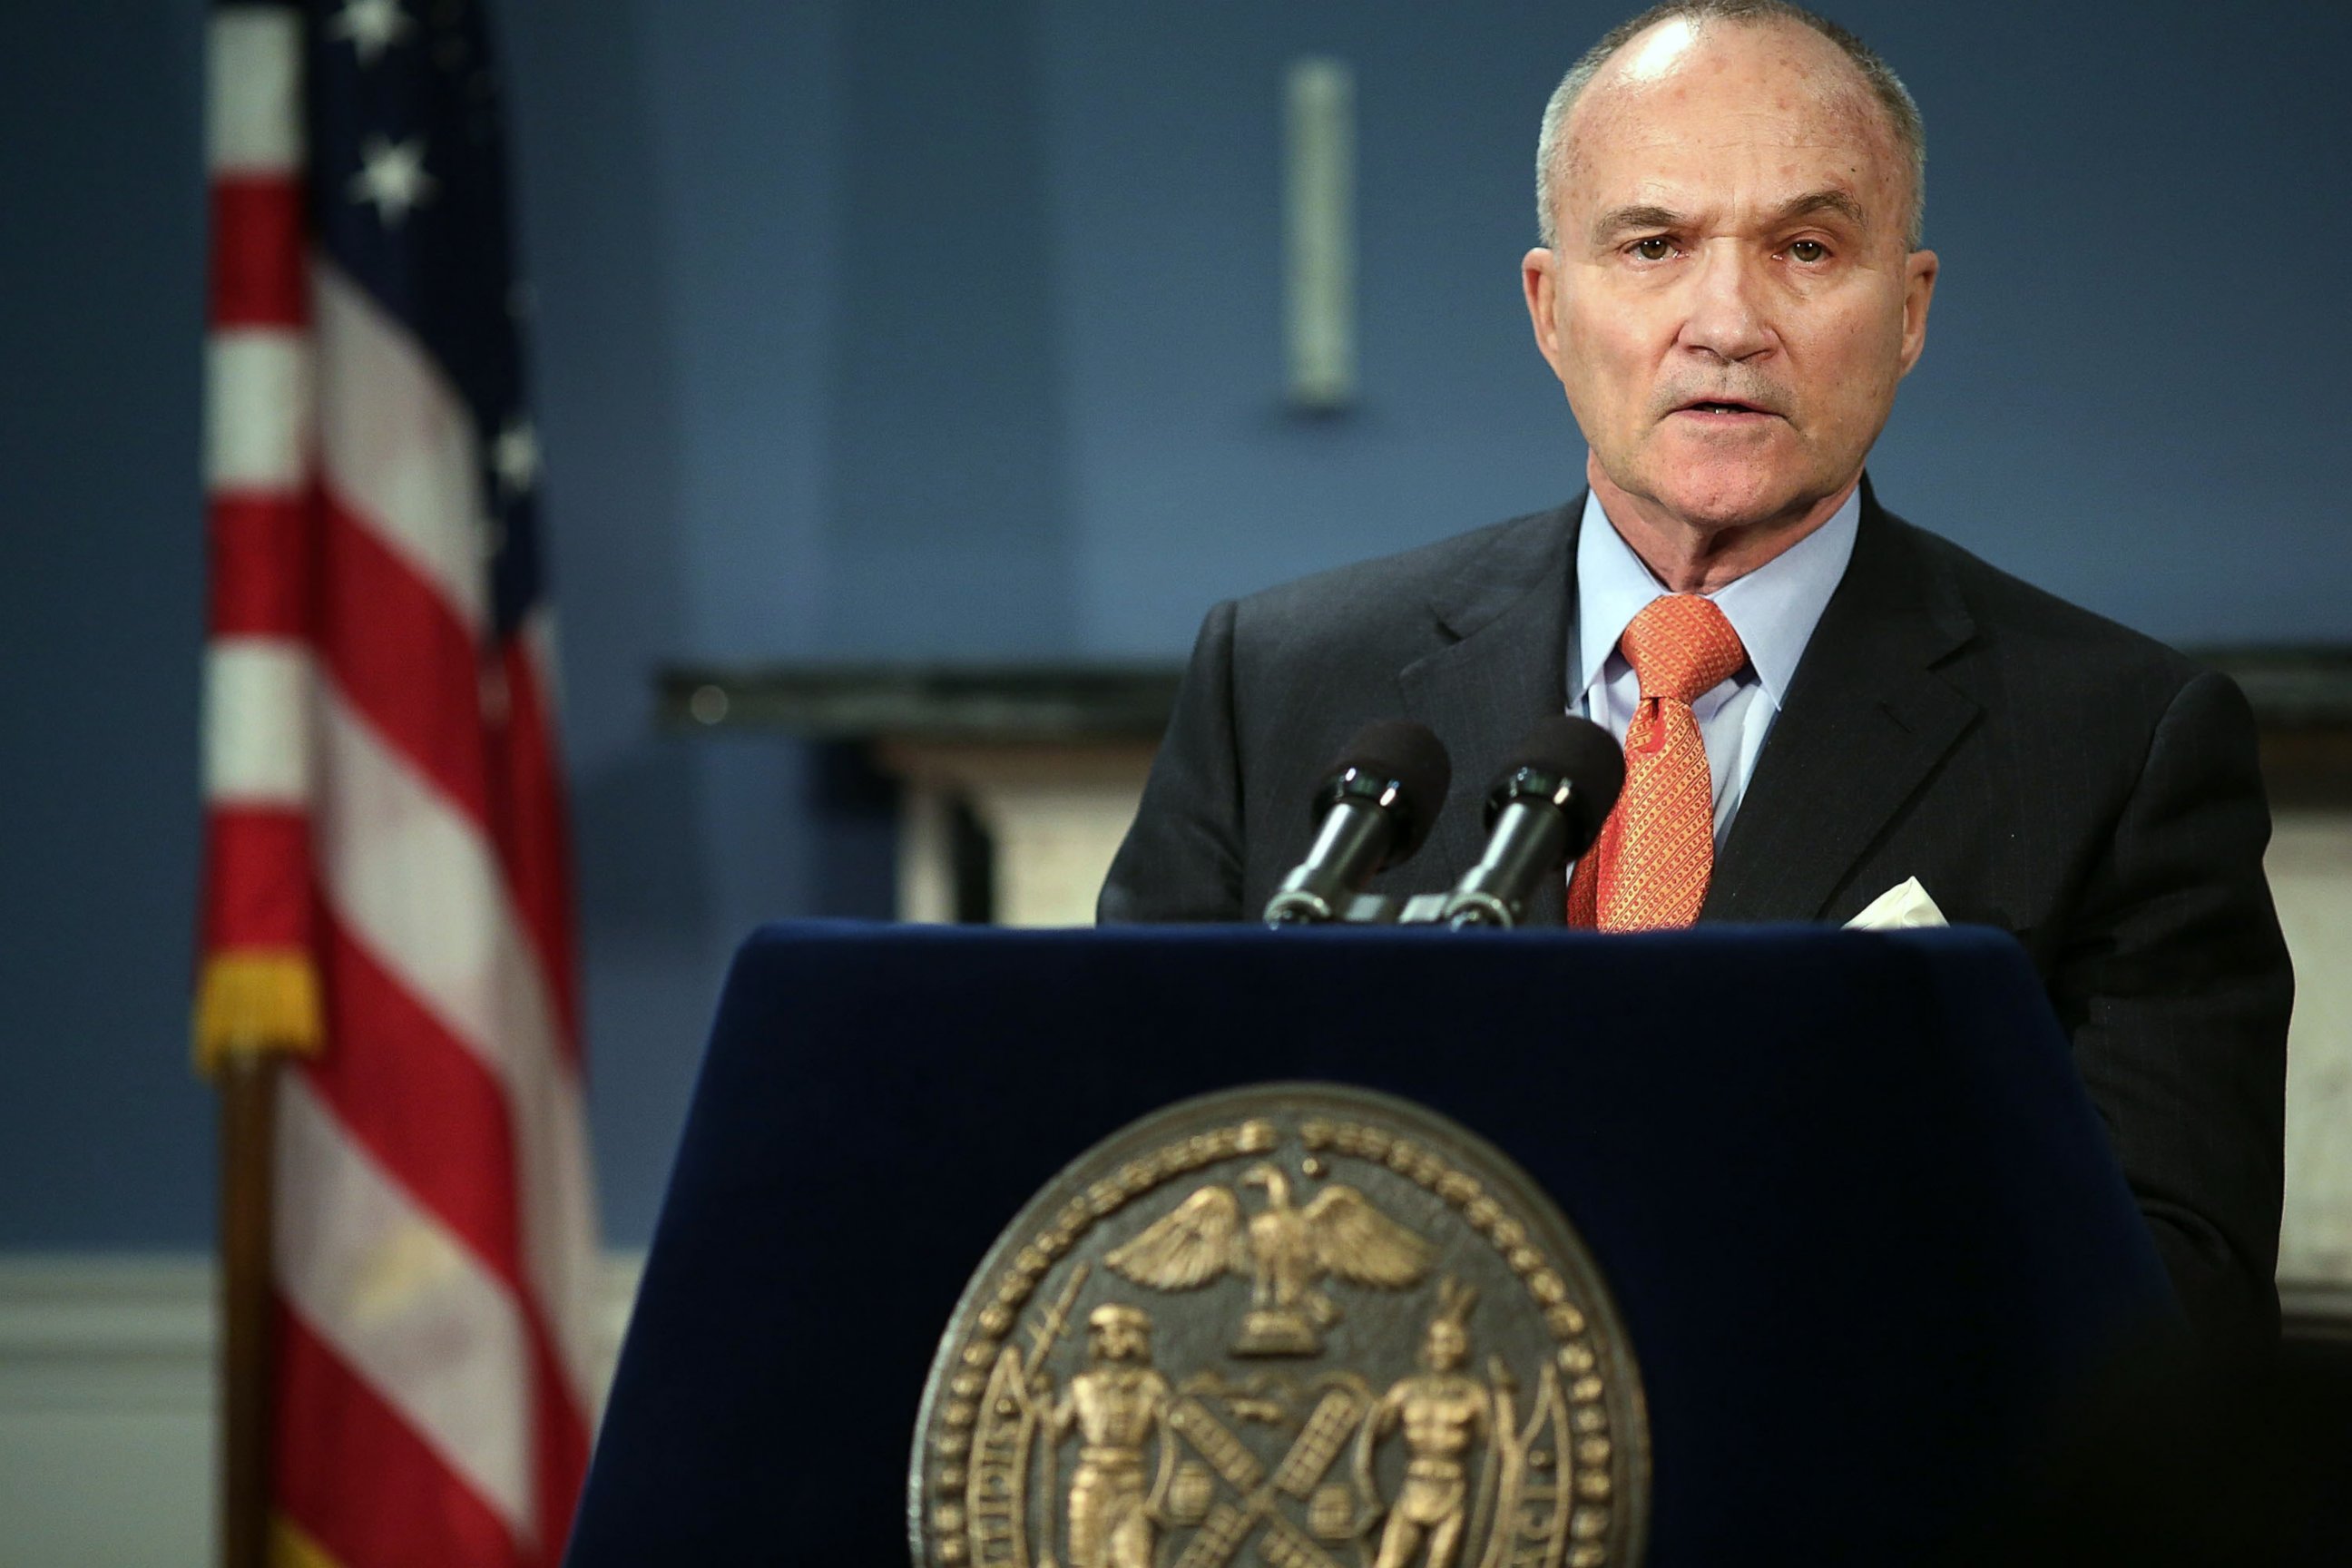 PHOTO: New York Police Commissioner Raymond Kelly speaks during a news conference in New York City, April 25, 2013.